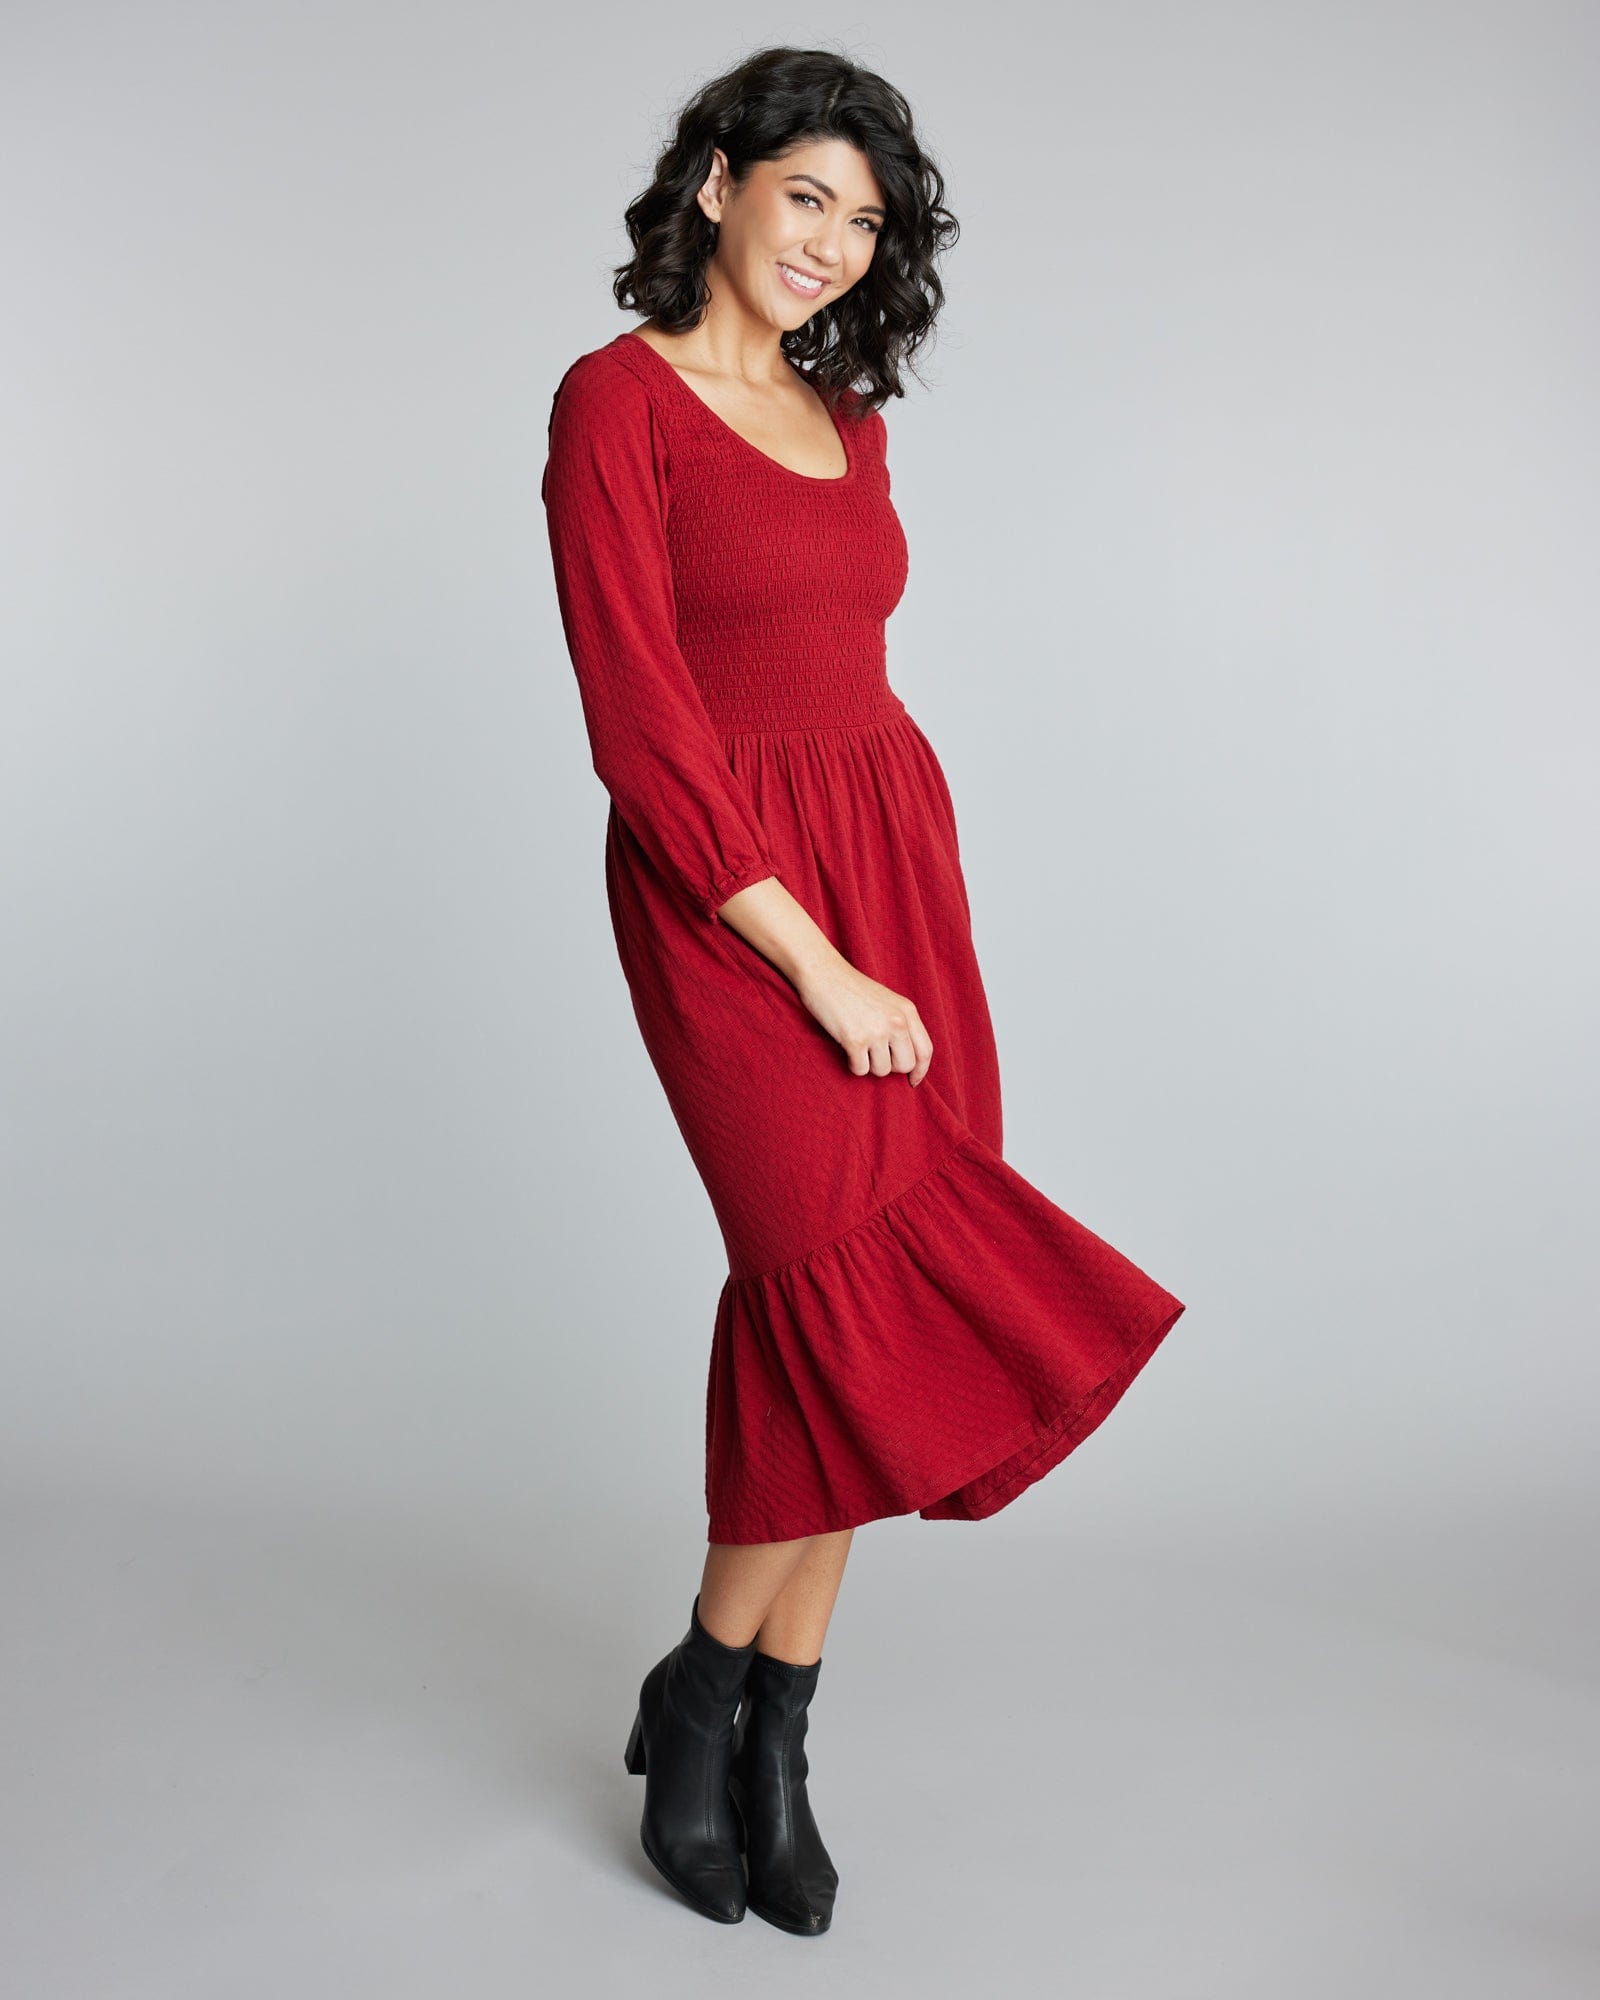 Woman in a 3/4 sleeve, red, midi-length dress